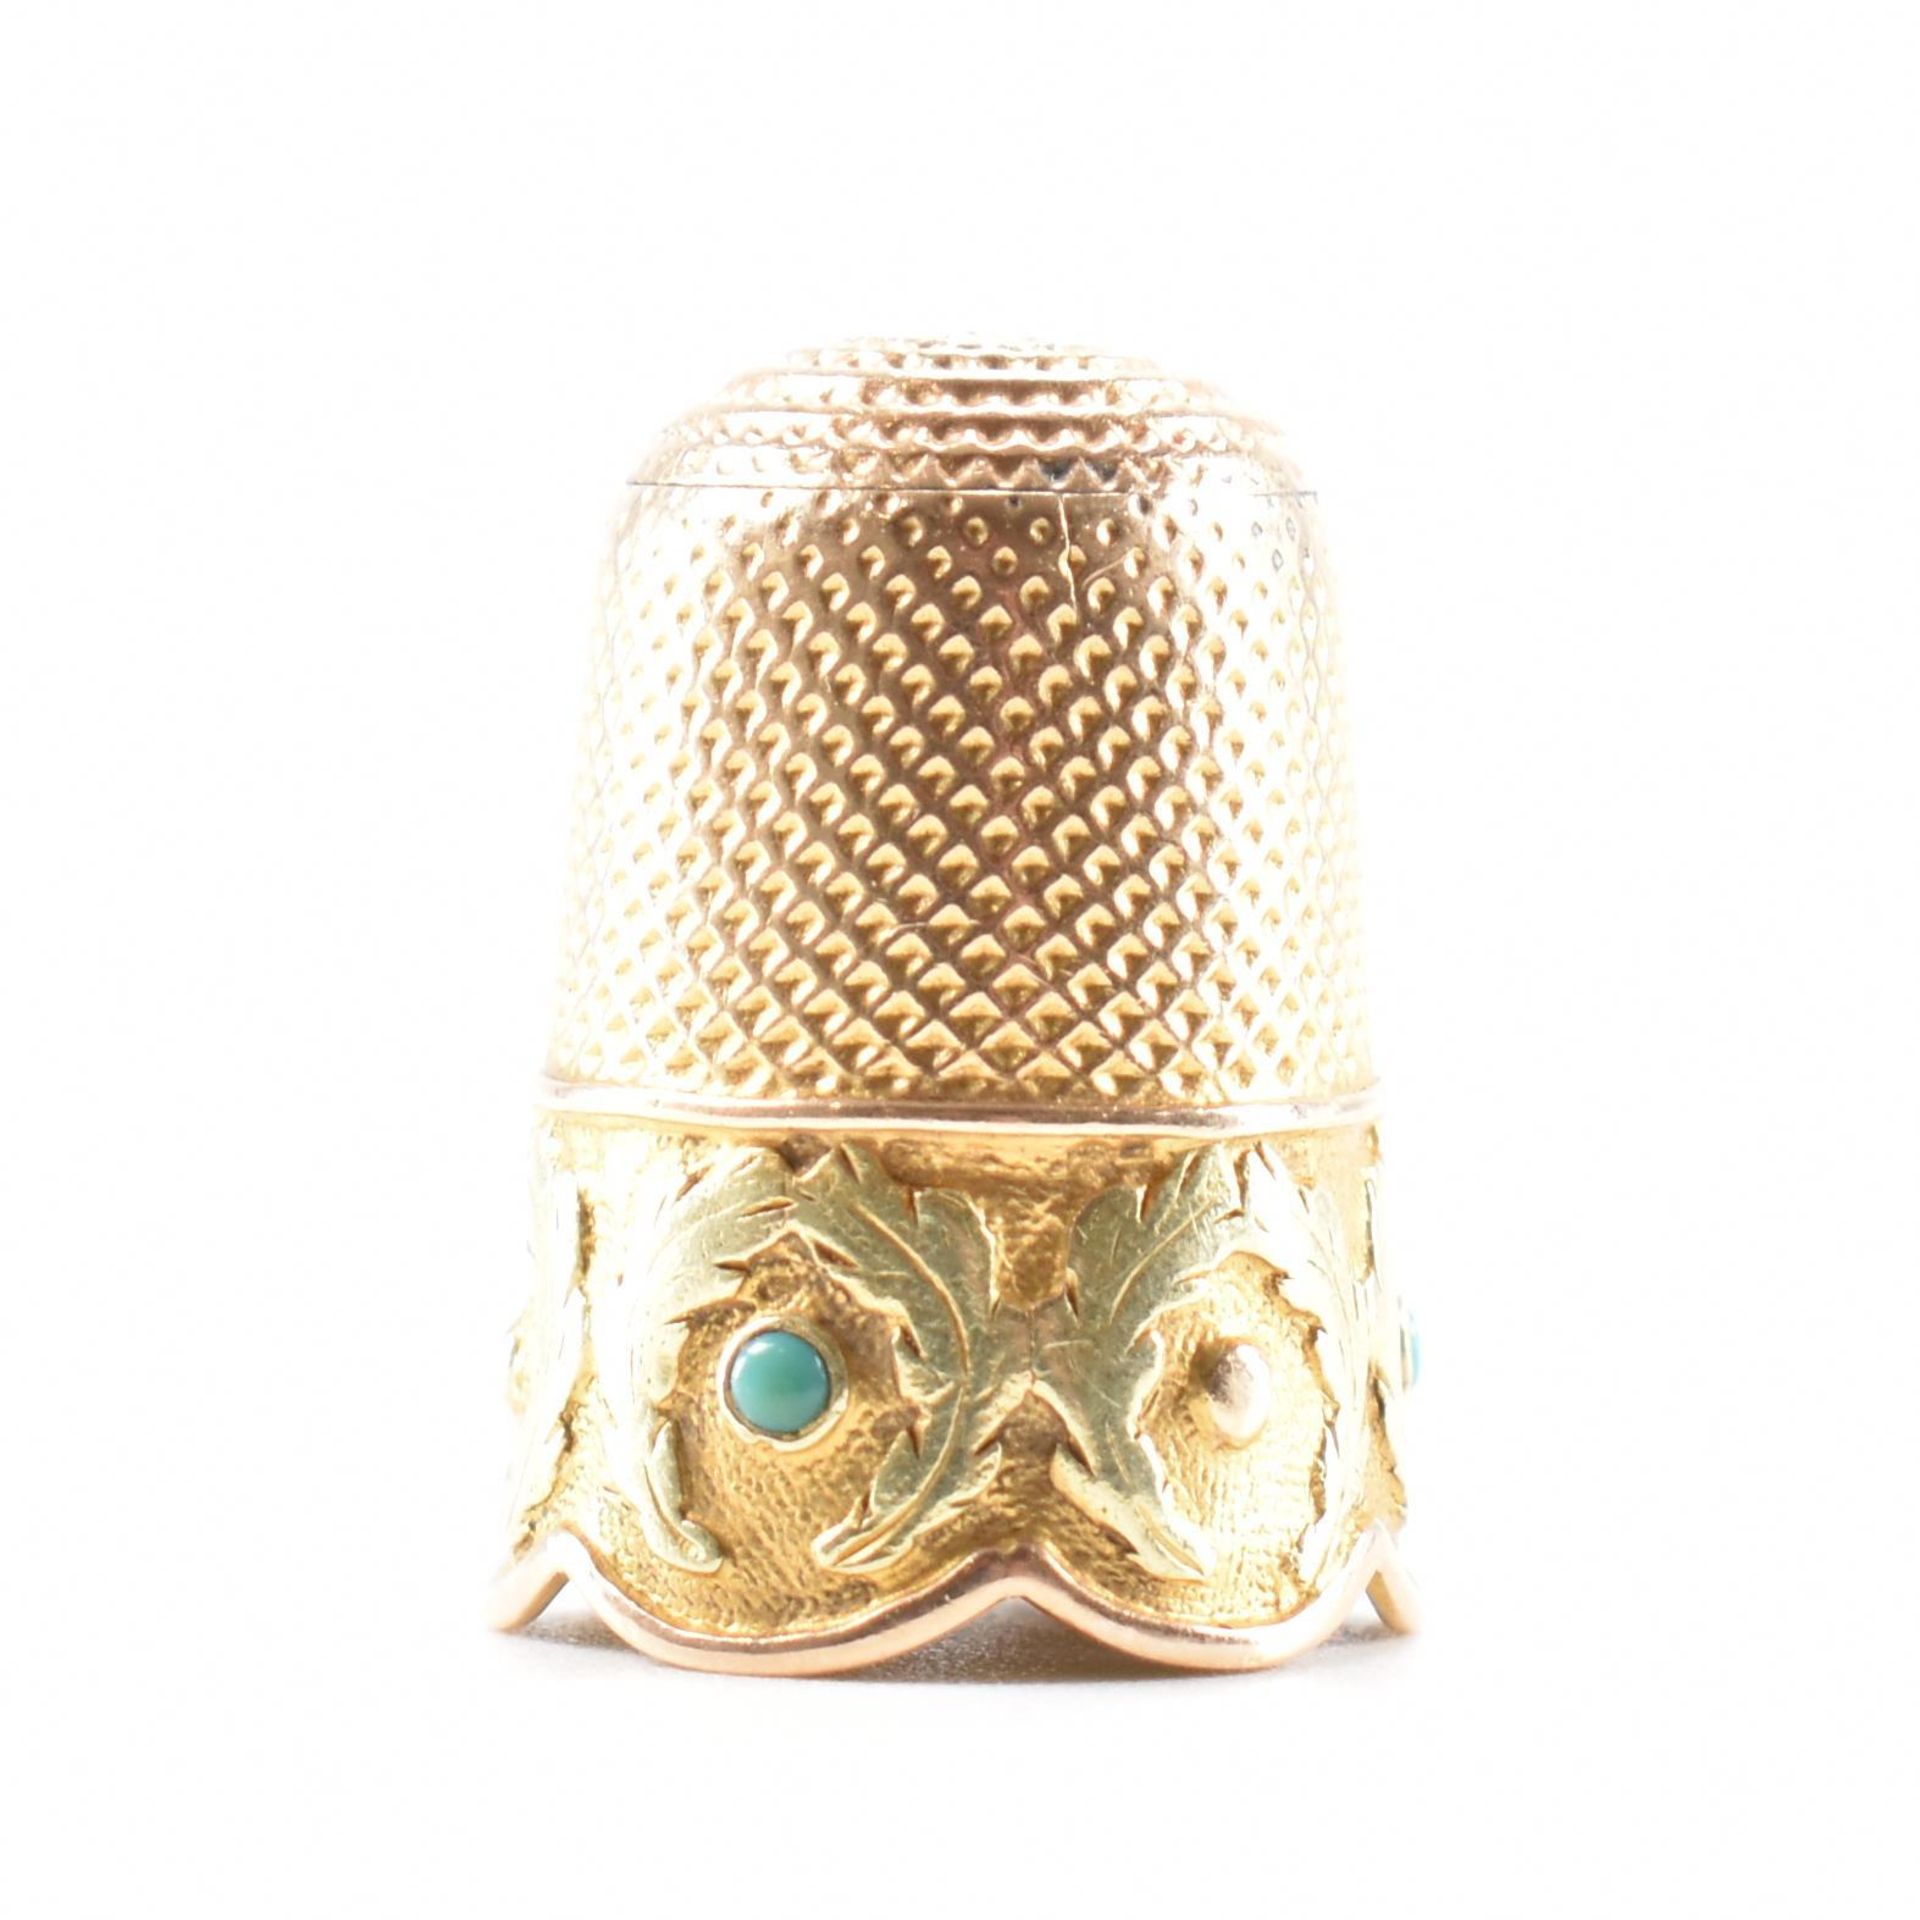 ANTIQUE GOLD & TURQUOISE THIMBLE - Image 2 of 7